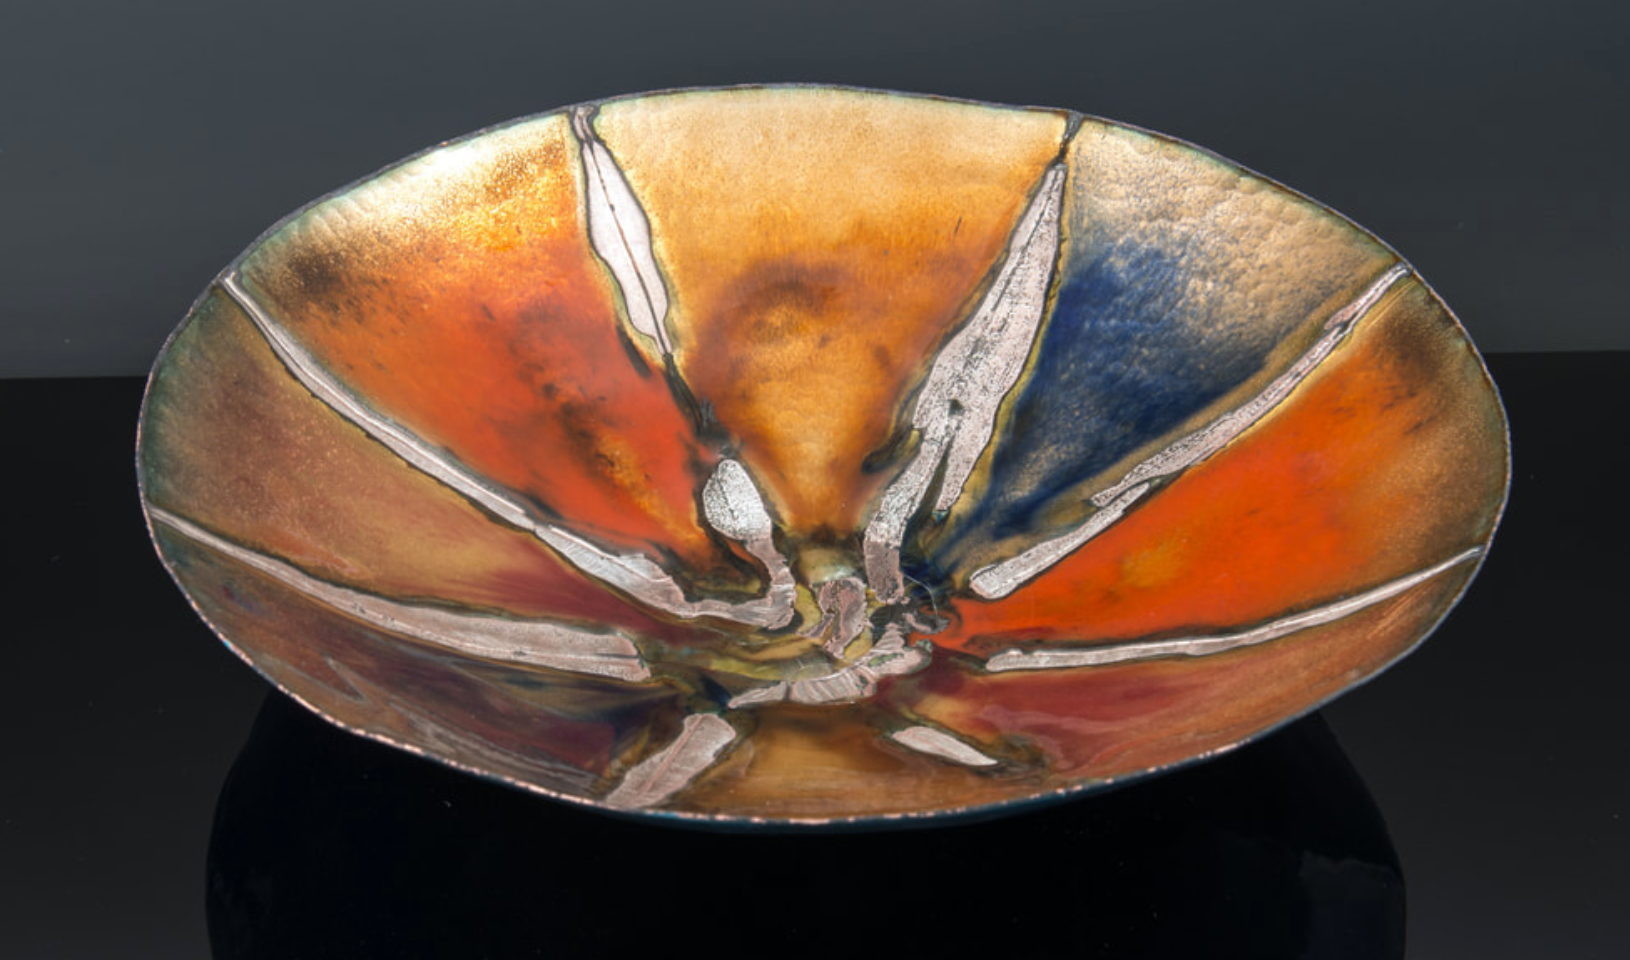 How did you do that? The making of a Eutectic fired Enamel Bowl.